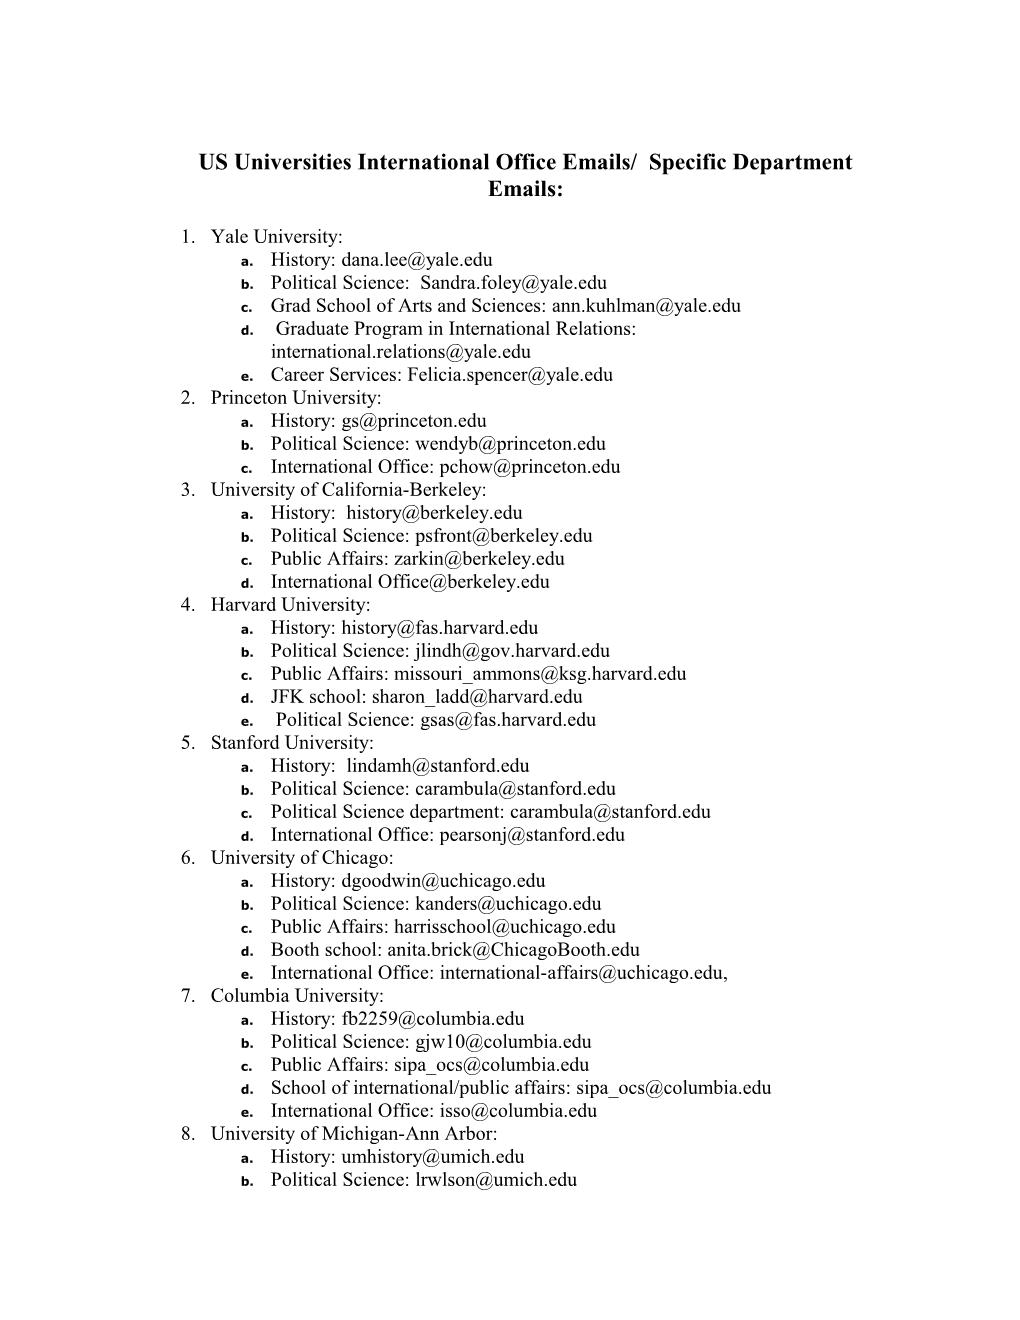 US Universities International Office Emails/ Specific Department Emails